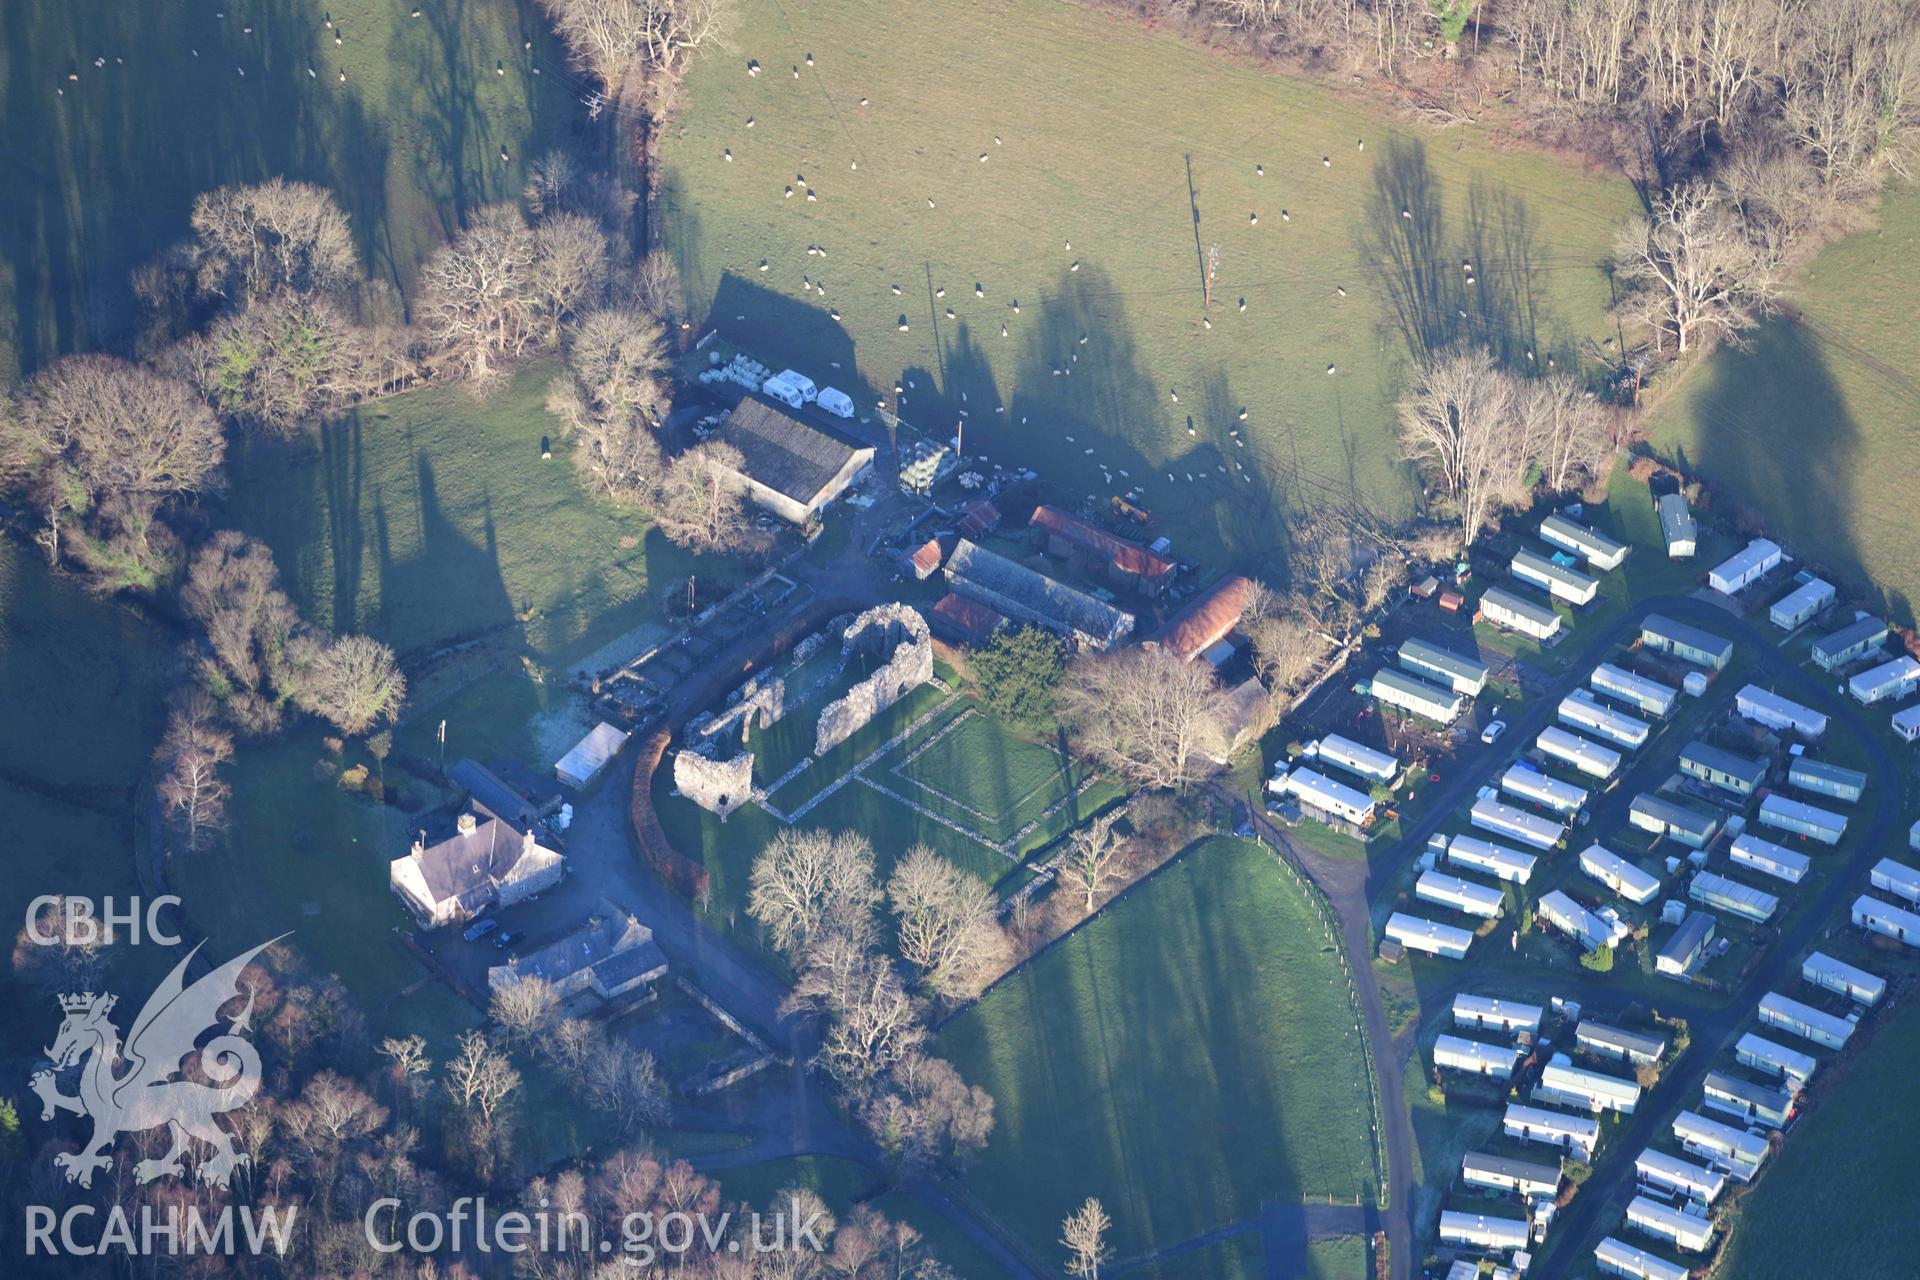 Oblique aerial photograph of Cymmer Abbey taken during the Royal Commission’s programme of archaeological aerial reconnaissance by Toby Driver on 17th January 2022